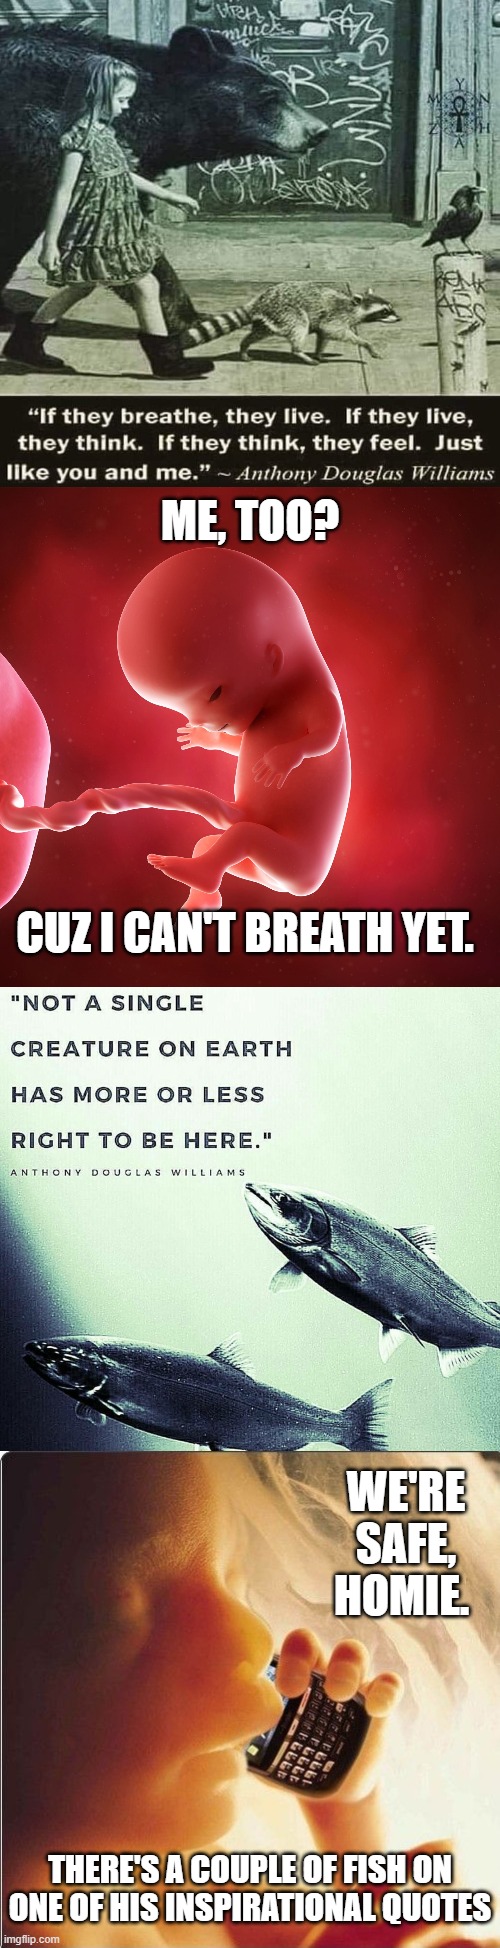 I don't assume the guy was pro life. I was just making a joke. Also, insert Pisces joke. | ME, TOO? CUZ I CAN'T BREATH YET. WE'RE SAFE, HOMIE. THERE'S A COUPLE OF FISH ON ONE OF HIS INSPIRATIONAL QUOTES | image tagged in fetus,baby in womb on cell phone - fetus blackberry,pro life,animal rights,anthony douglas williams,girl with animals | made w/ Imgflip meme maker